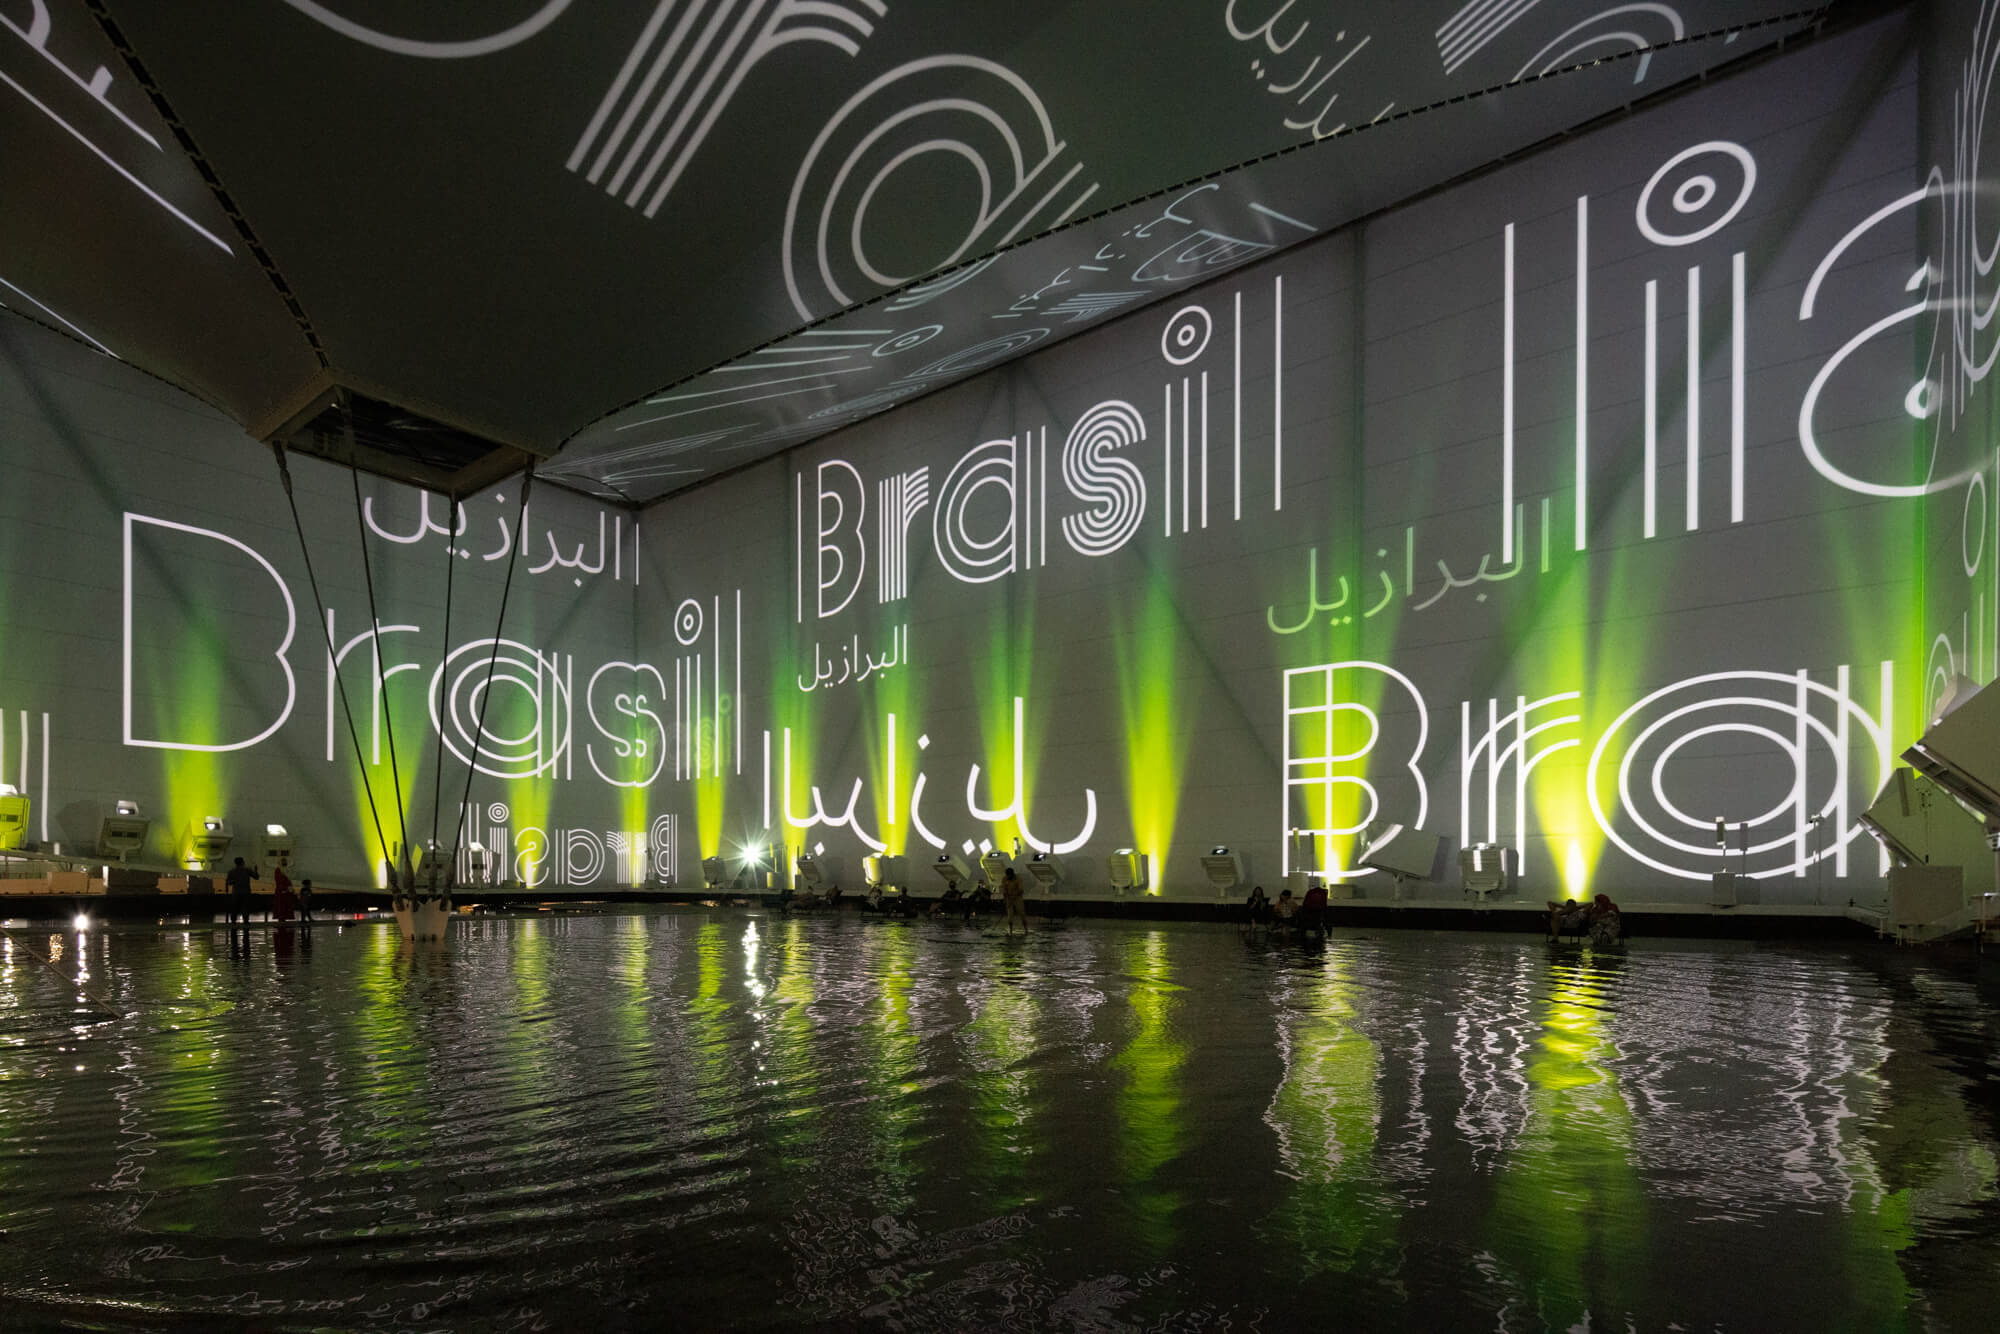 digital projects spelling out "brasil" surround an indoor pool of water